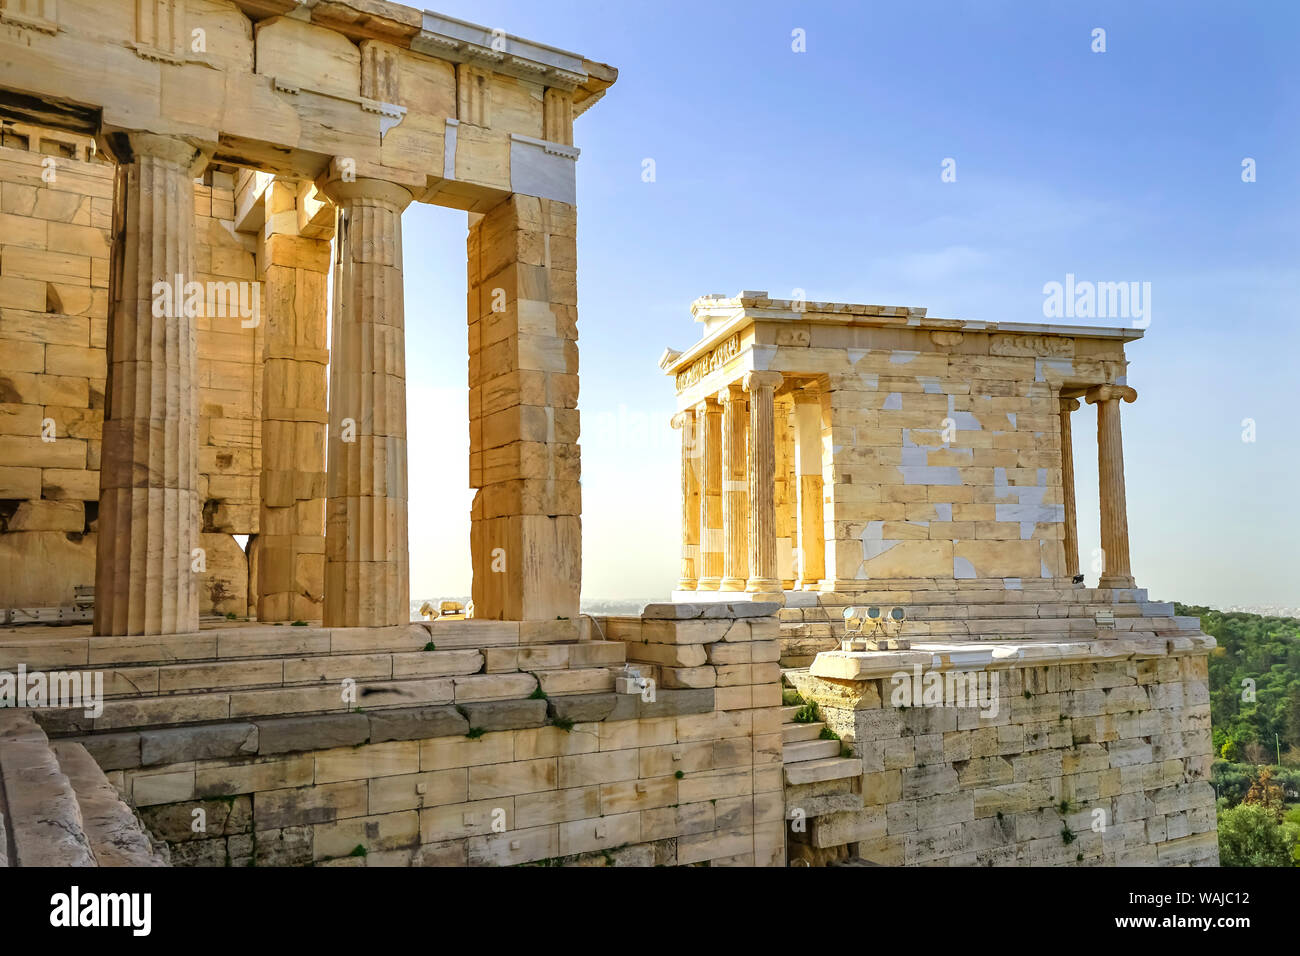 Temple of Athena Nike, Propylaea Ancient entrance gateway ruins Acropolis,  Athens, Greece. Construction ended in 432 BC, temple built 420 BC. Nike in  Greek means victory Stock Photo - Alamy